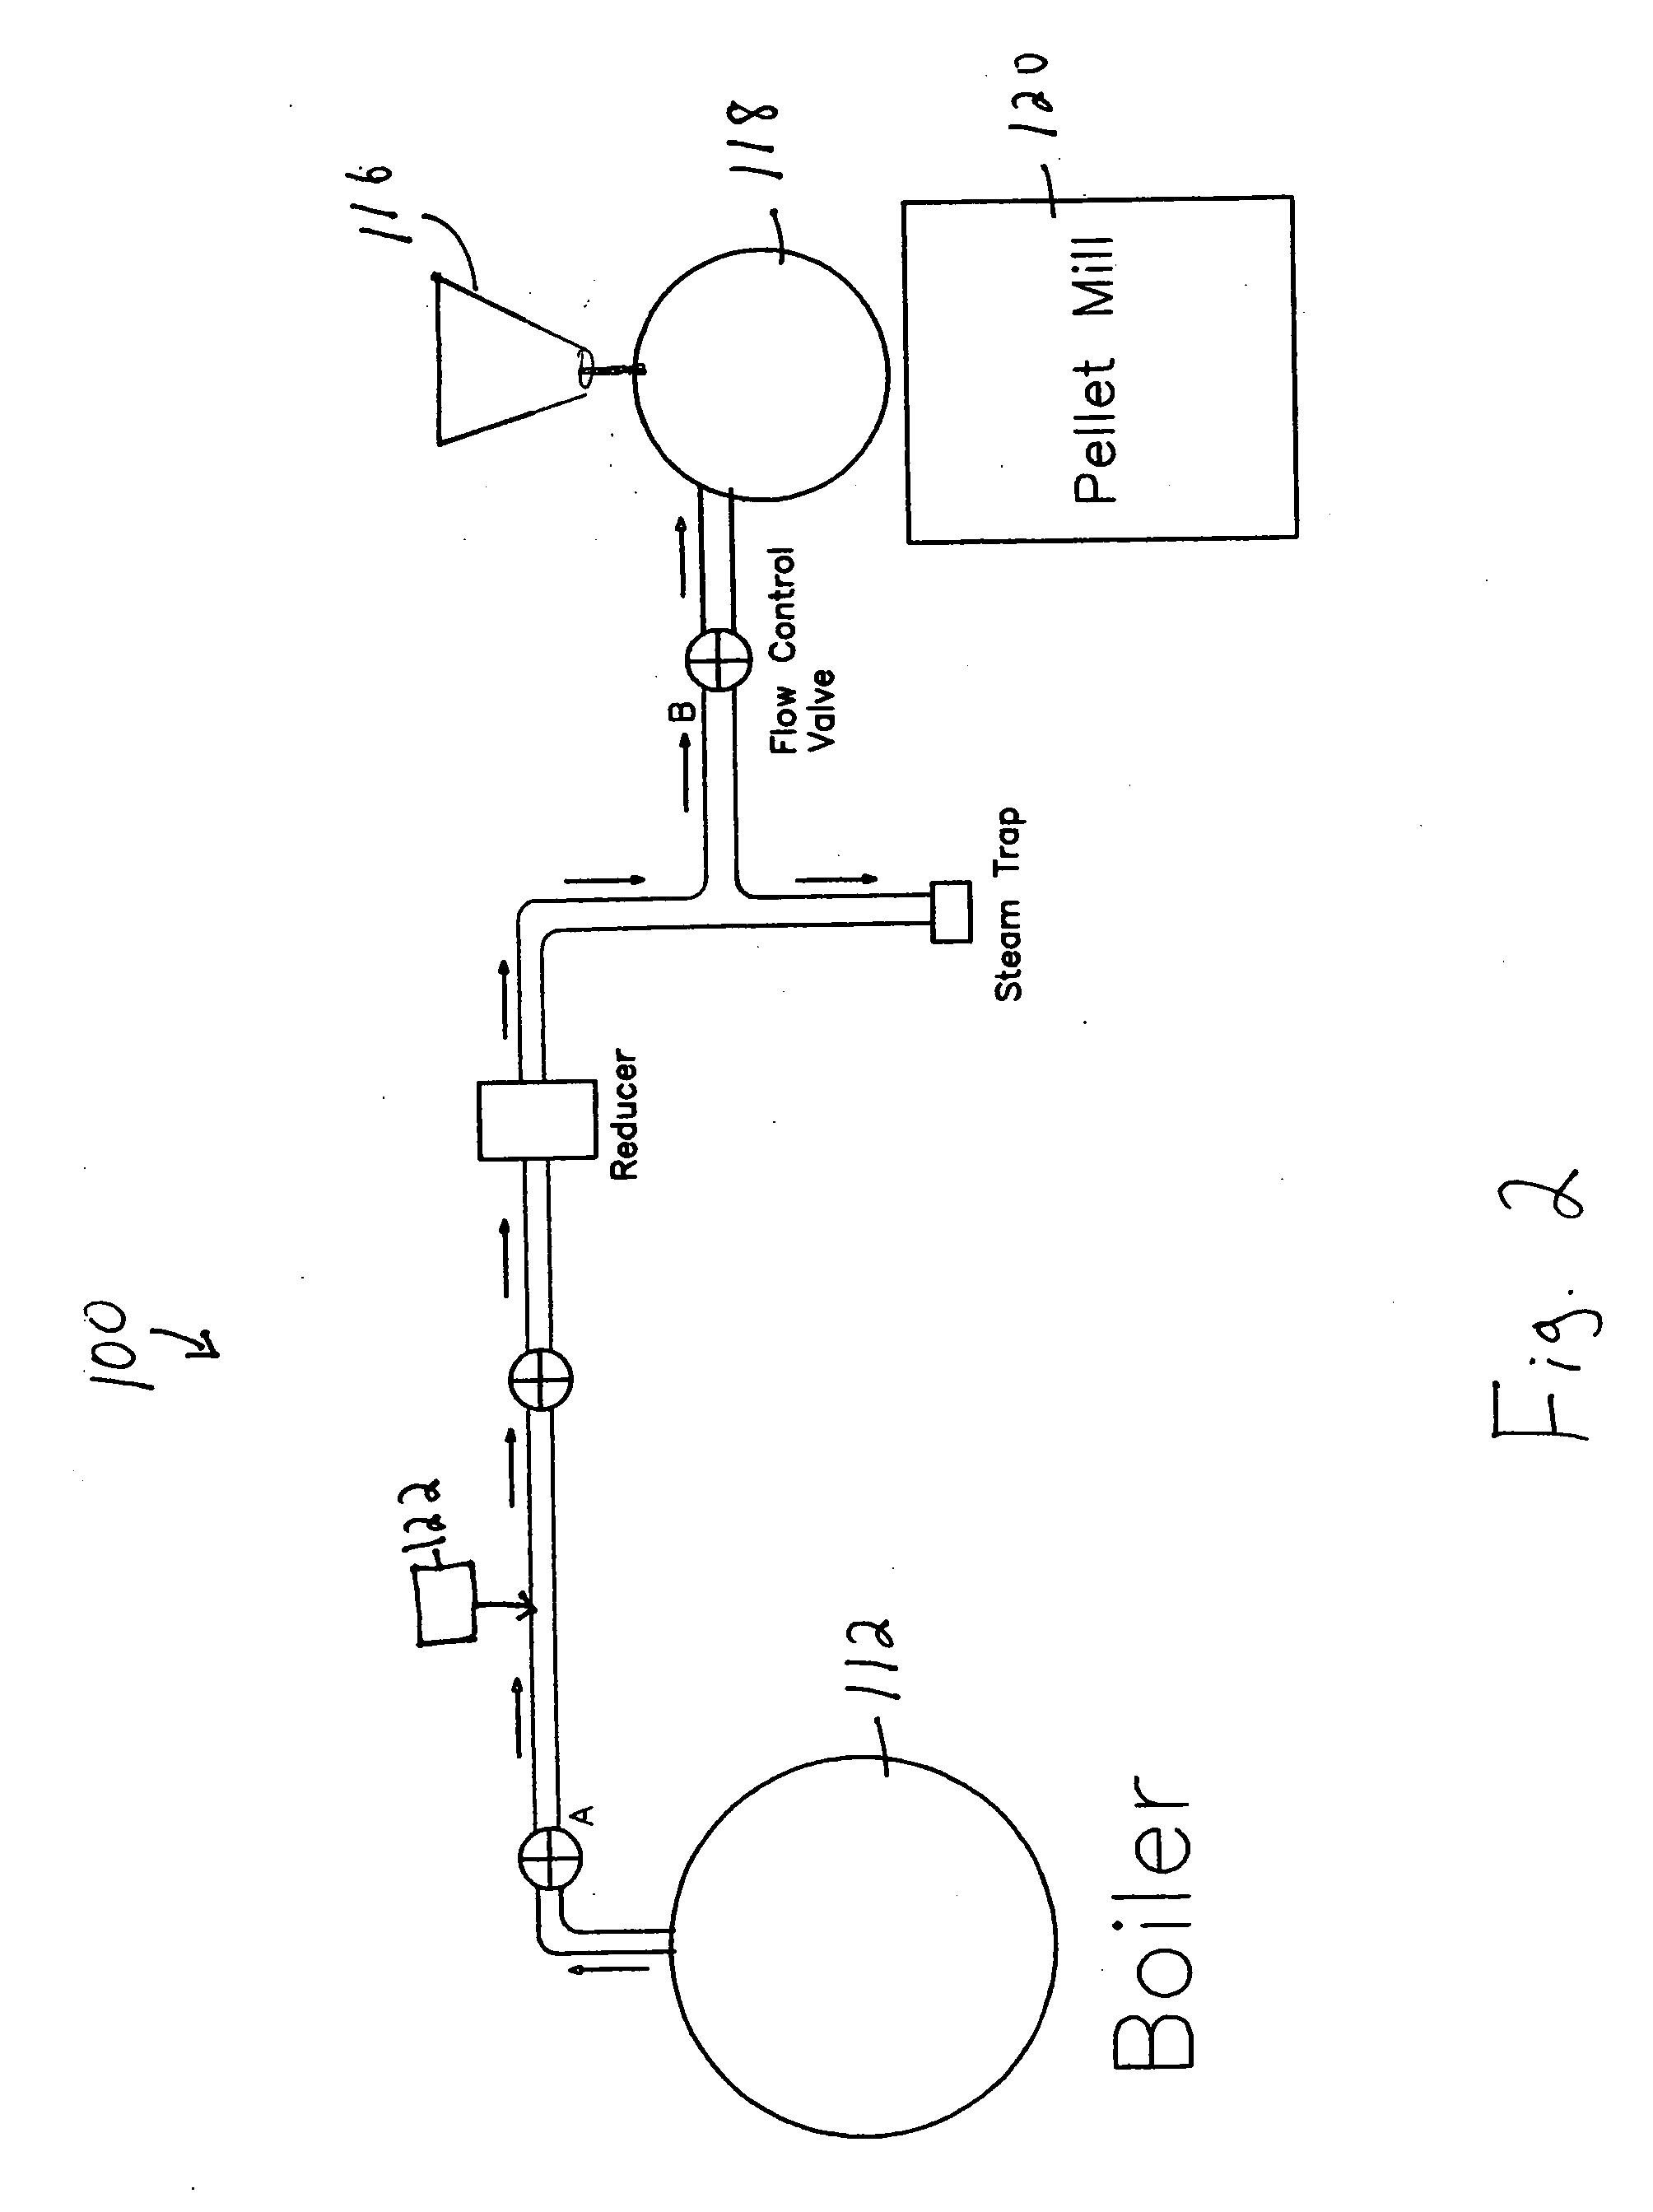 Method and system for producing animal feed